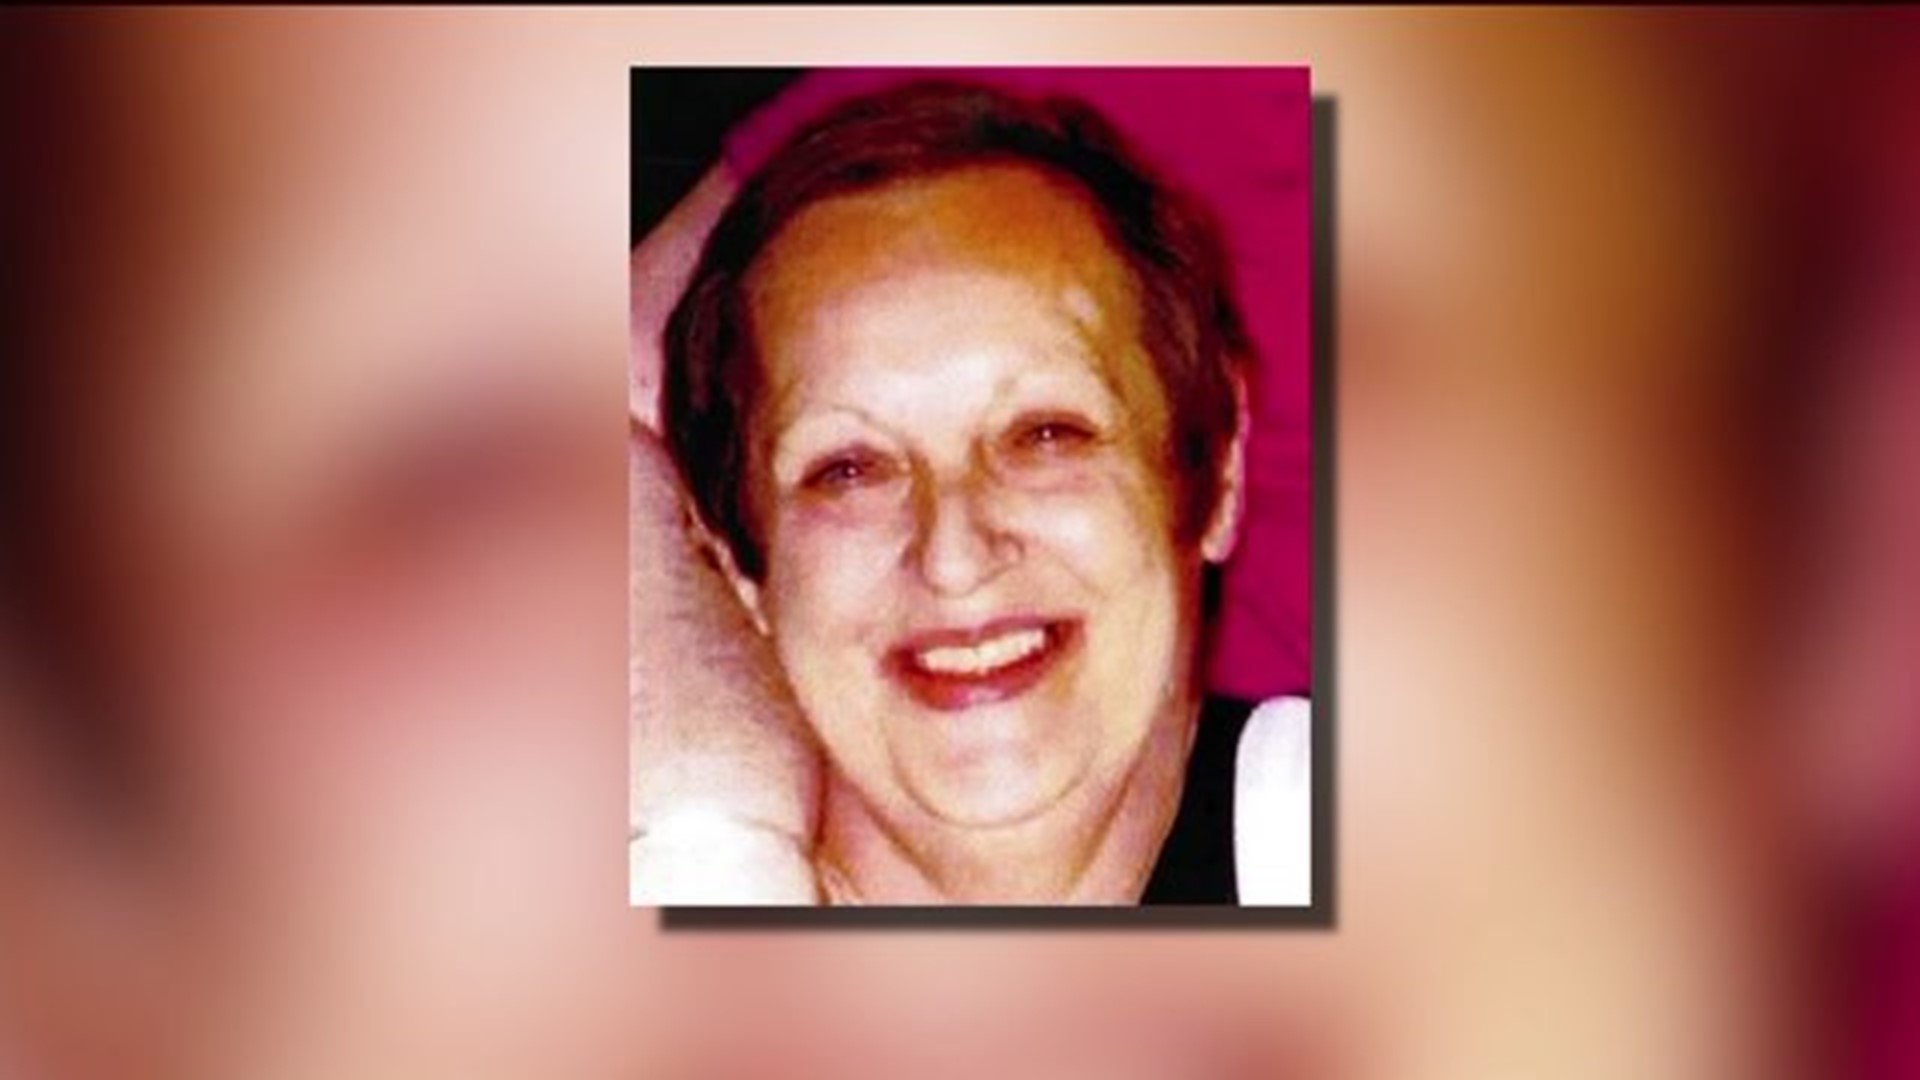 Search continues three weeks after Middletown woman went missing